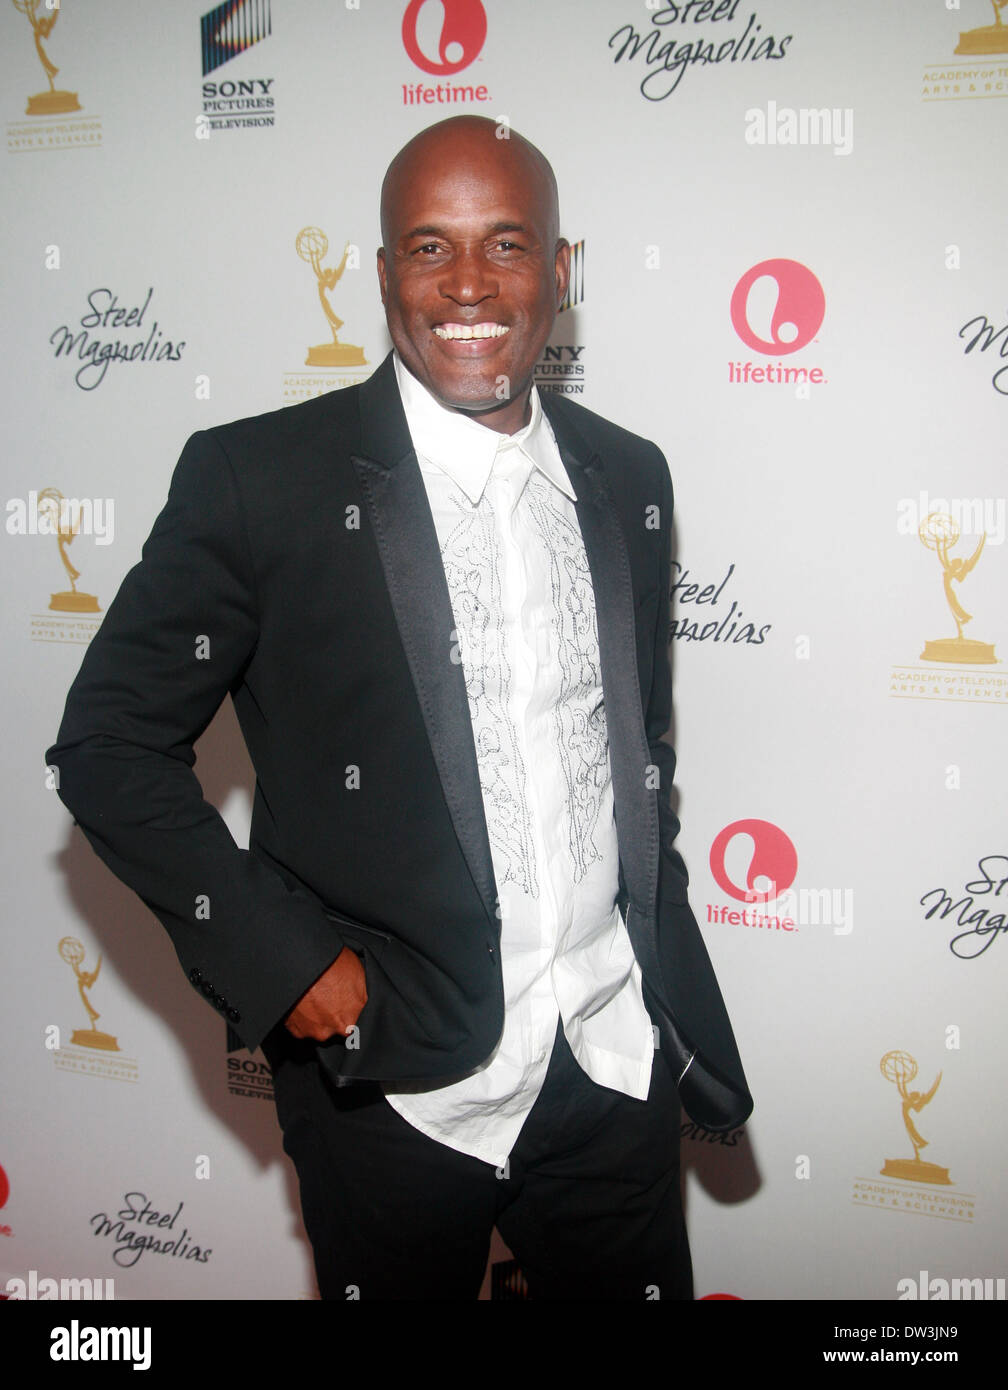 Kenny Leon attends the world premiere of the Lifetime Original Movie Event, Steel Magnolias held at the Paris Theater Featuring: Kenny Leon Where: New York, United States When: 03 Oct 2012 Stock Photo